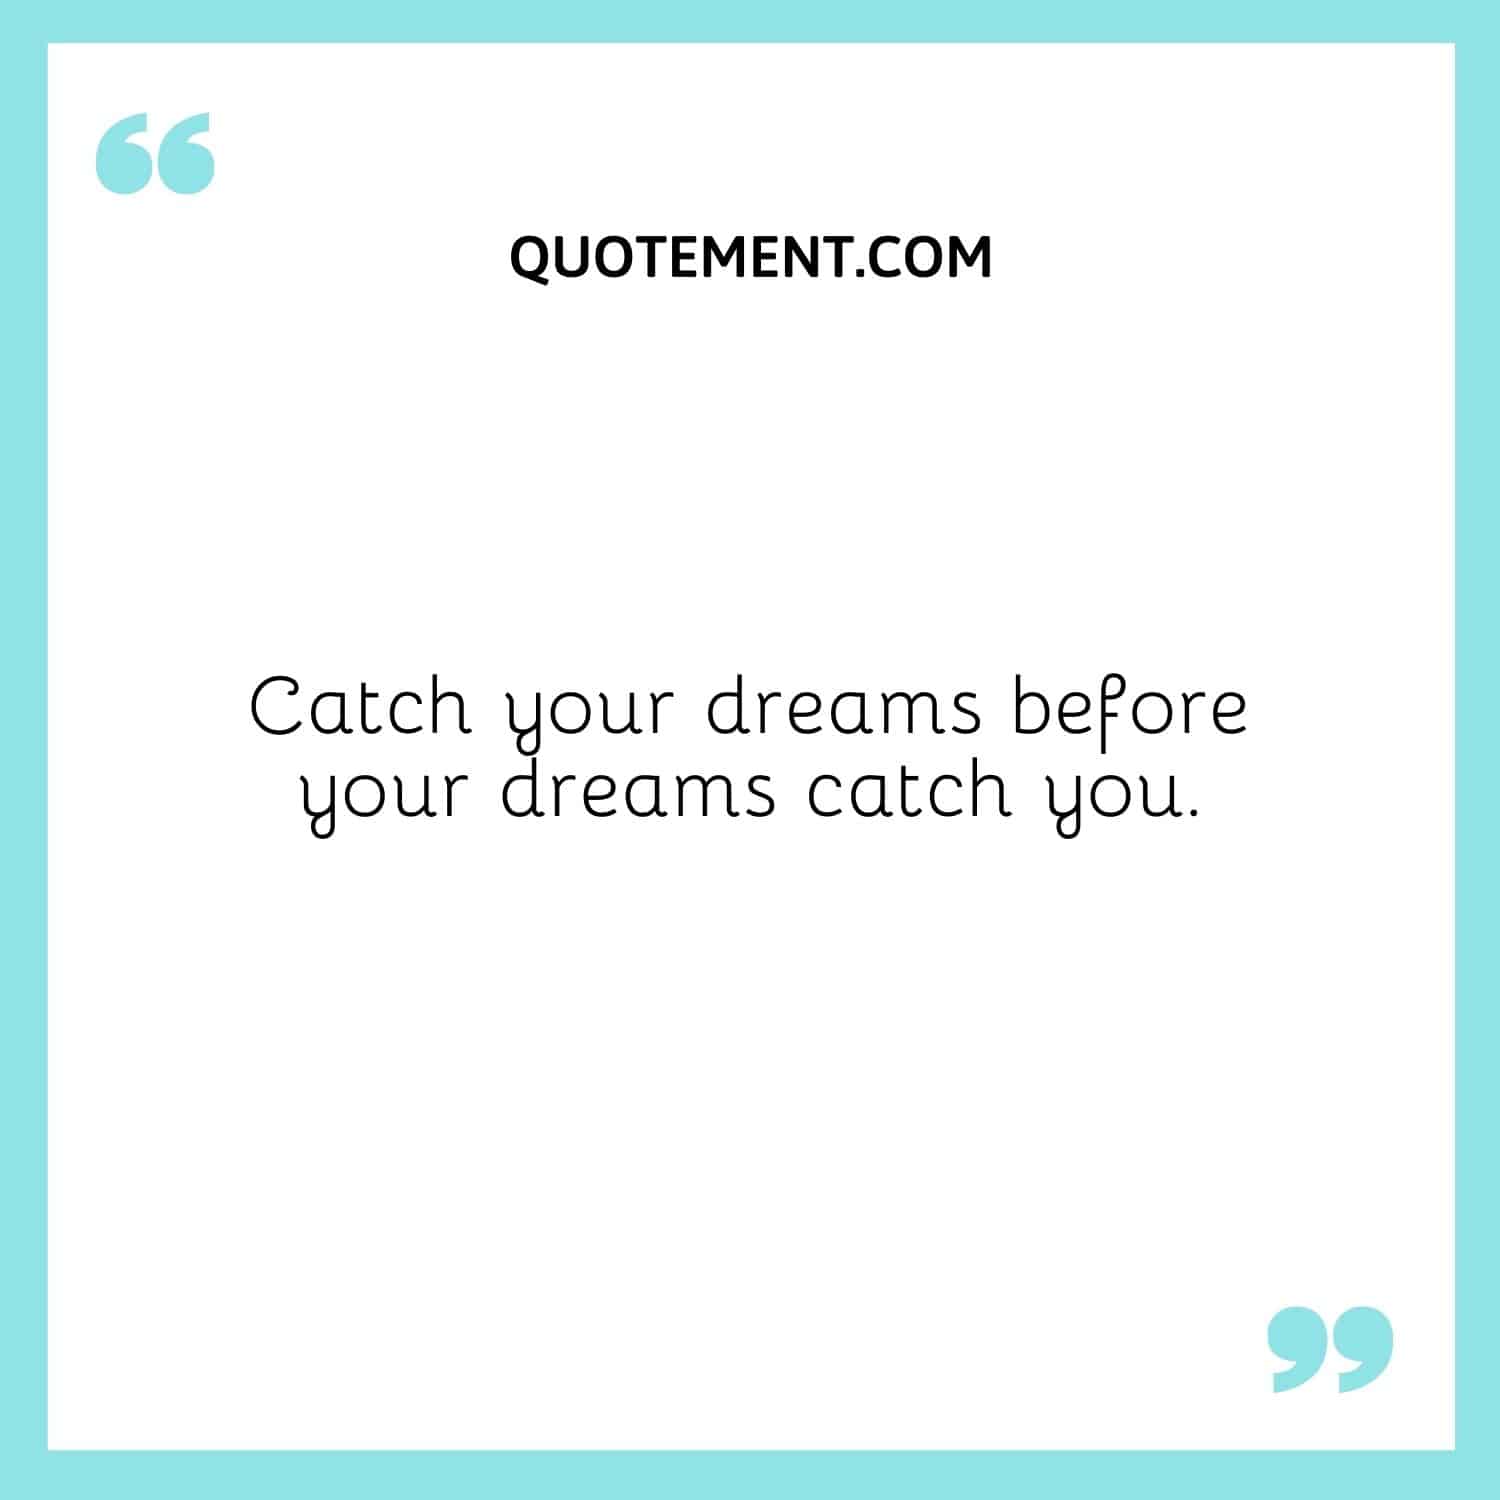 Catch your dreams before your dreams catch you.